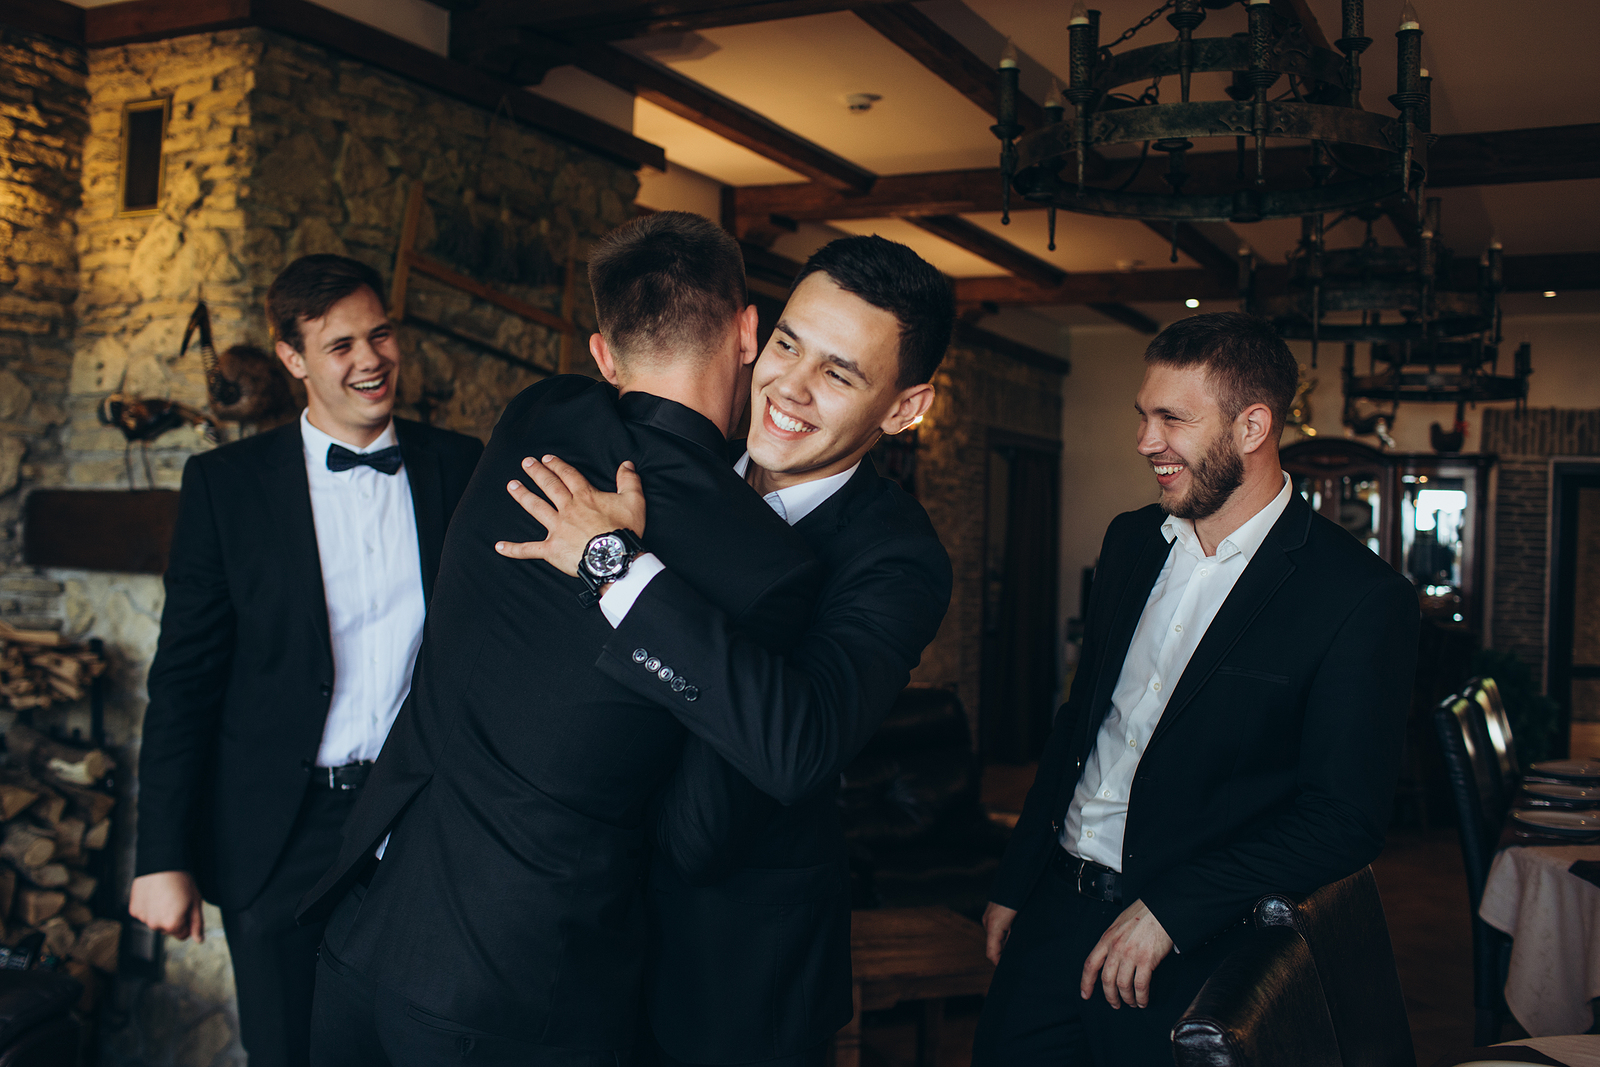 A group of 4 friends wearing tuxedos for a wedding. There are two friends hugging  in the front.